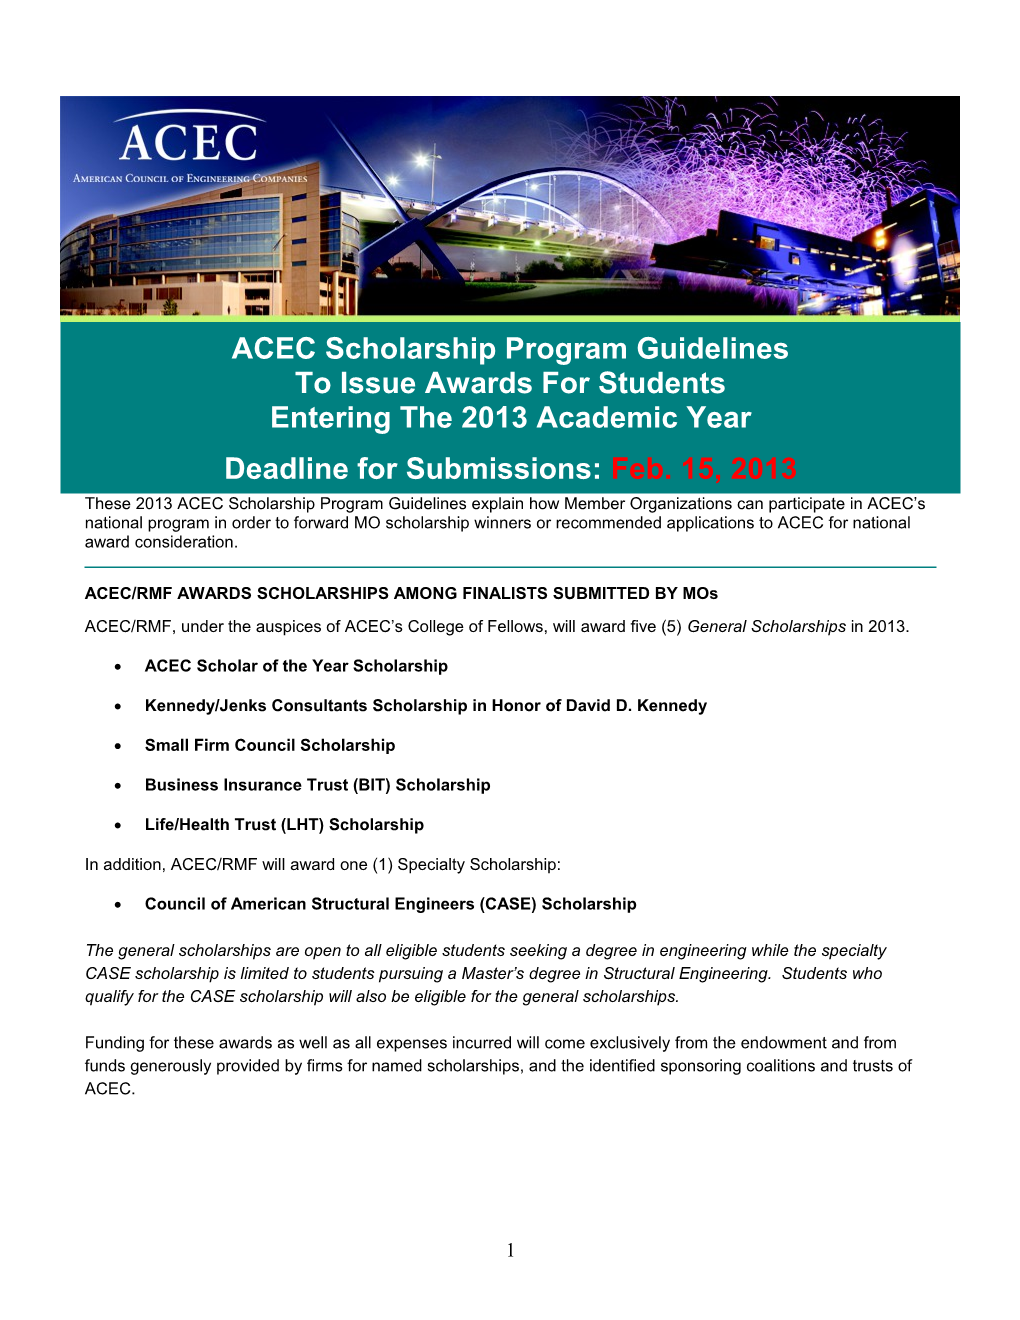 ACEC/RMF AWARDS SCHOLARSHIPS AMONG FINALISTS SUBMITTED by Mos